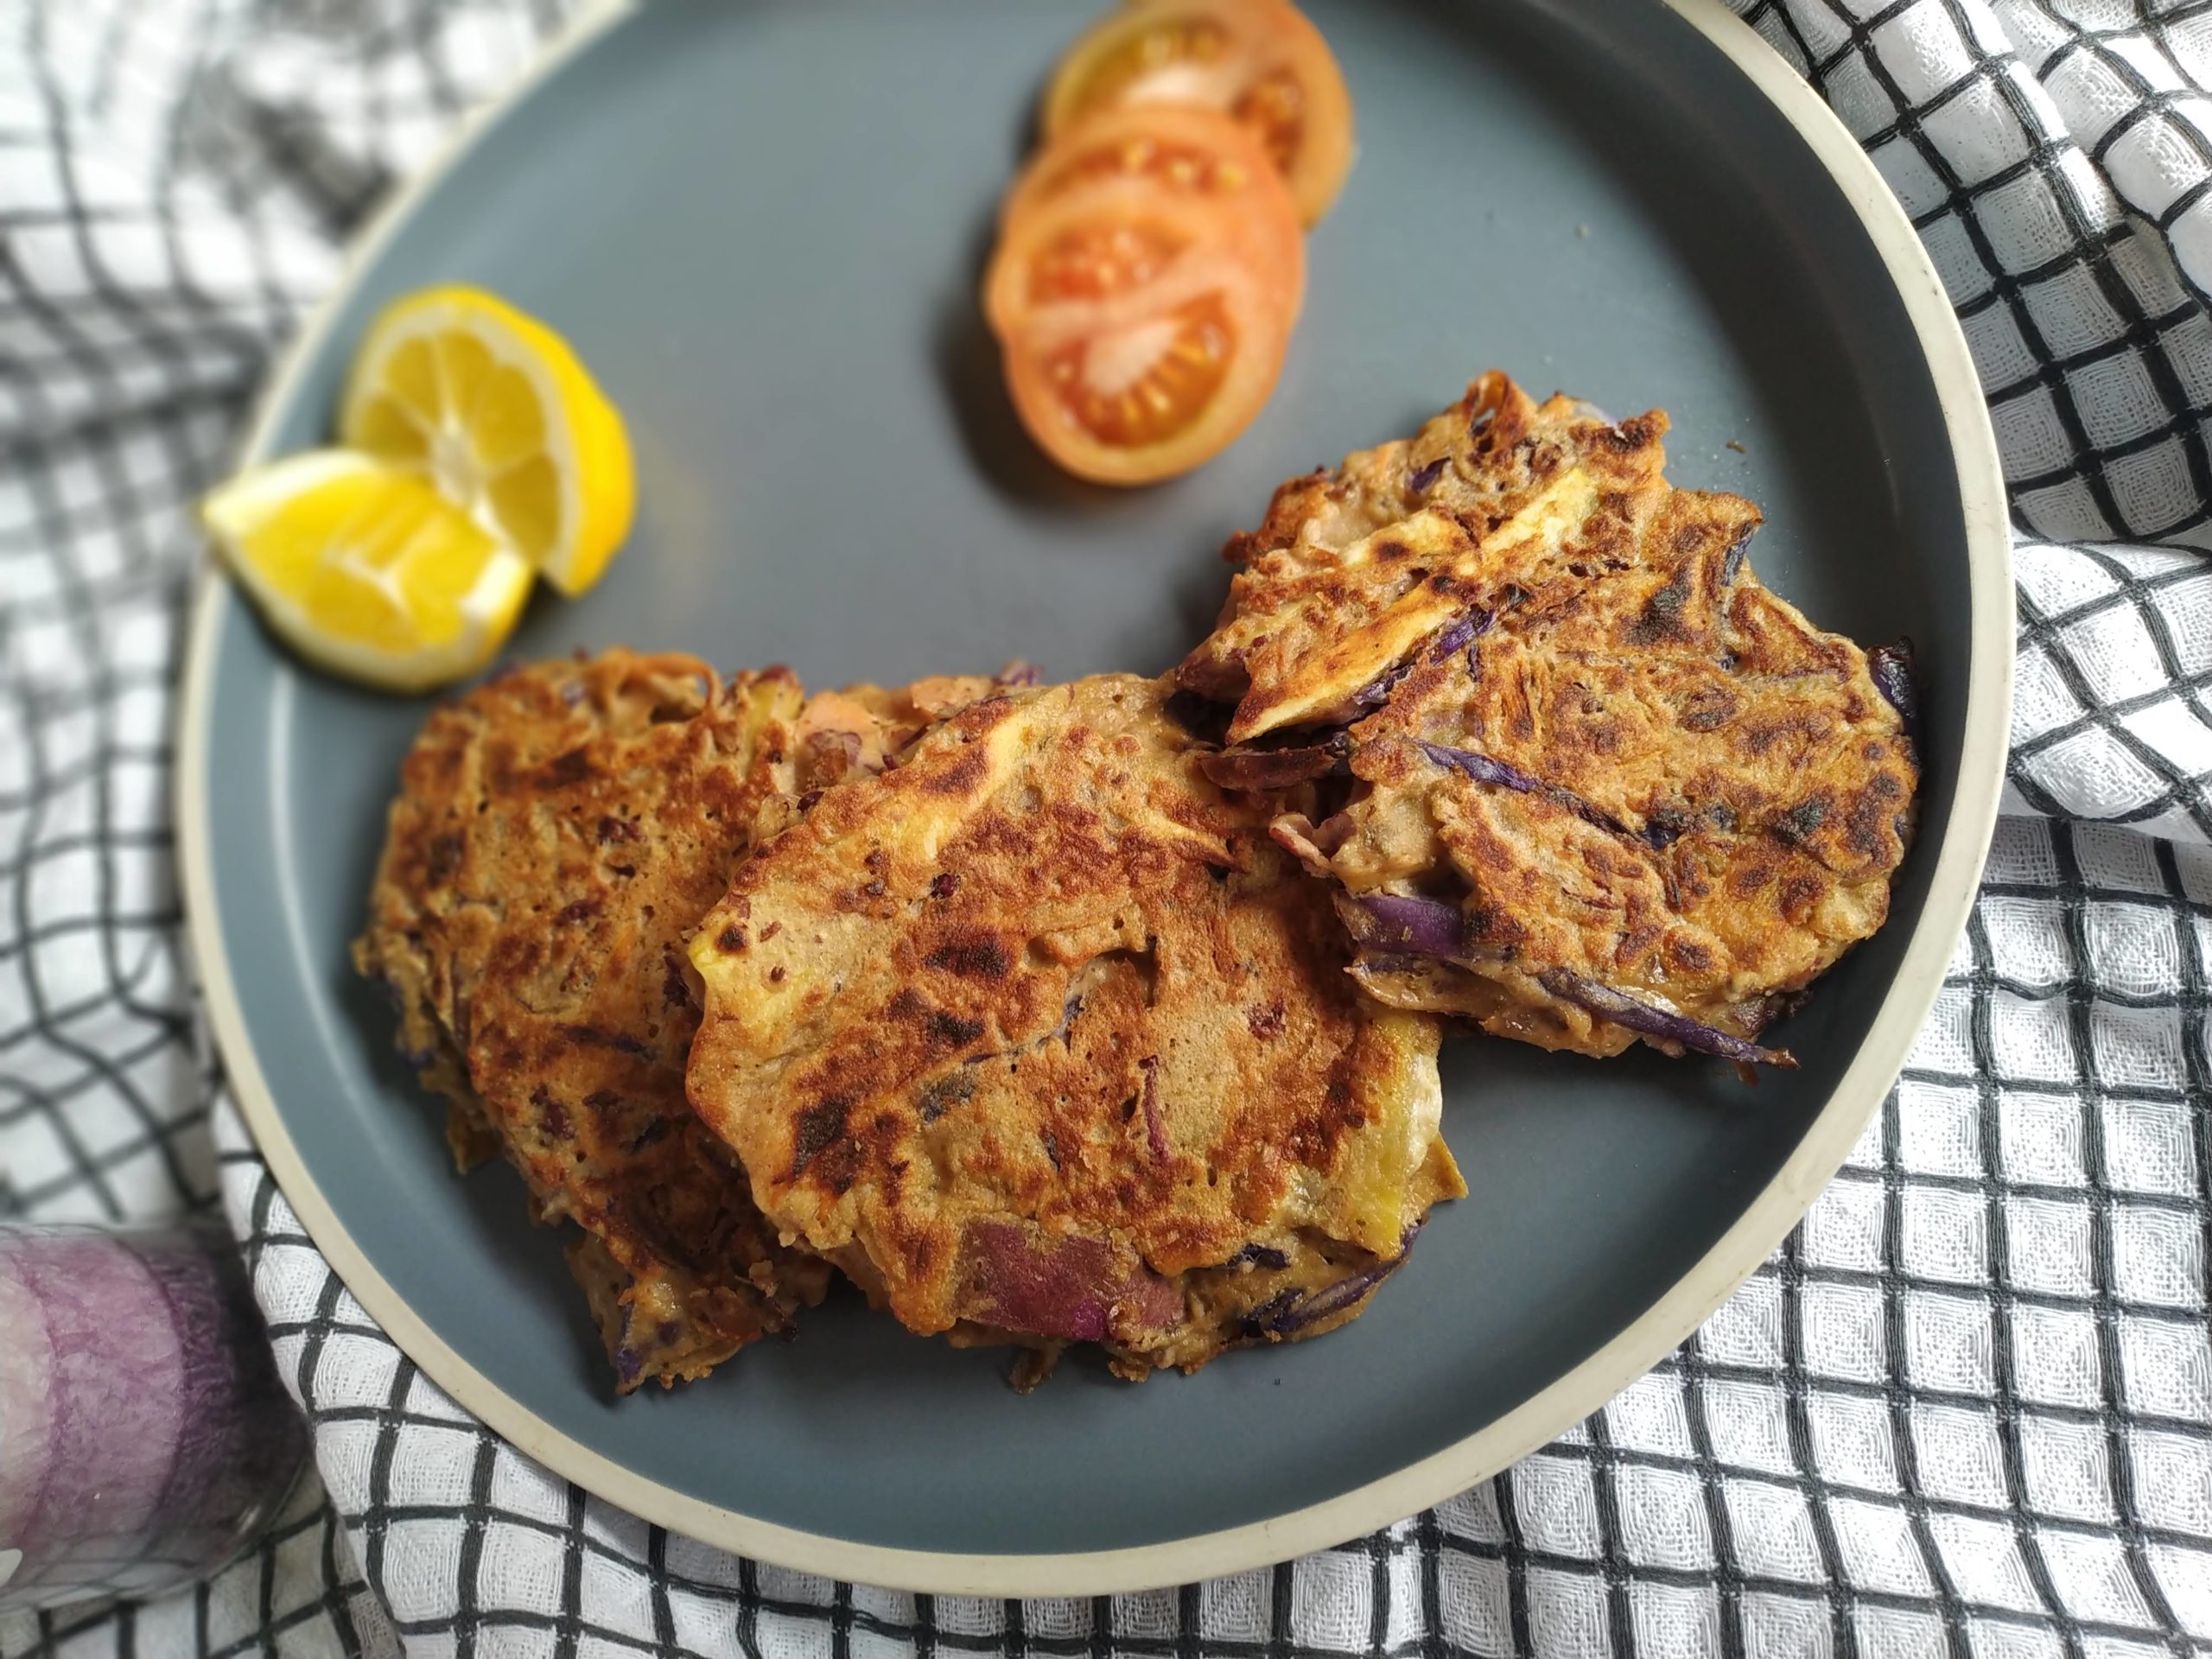 vegetable fritters on a blue plate with slices of tomato and lemon